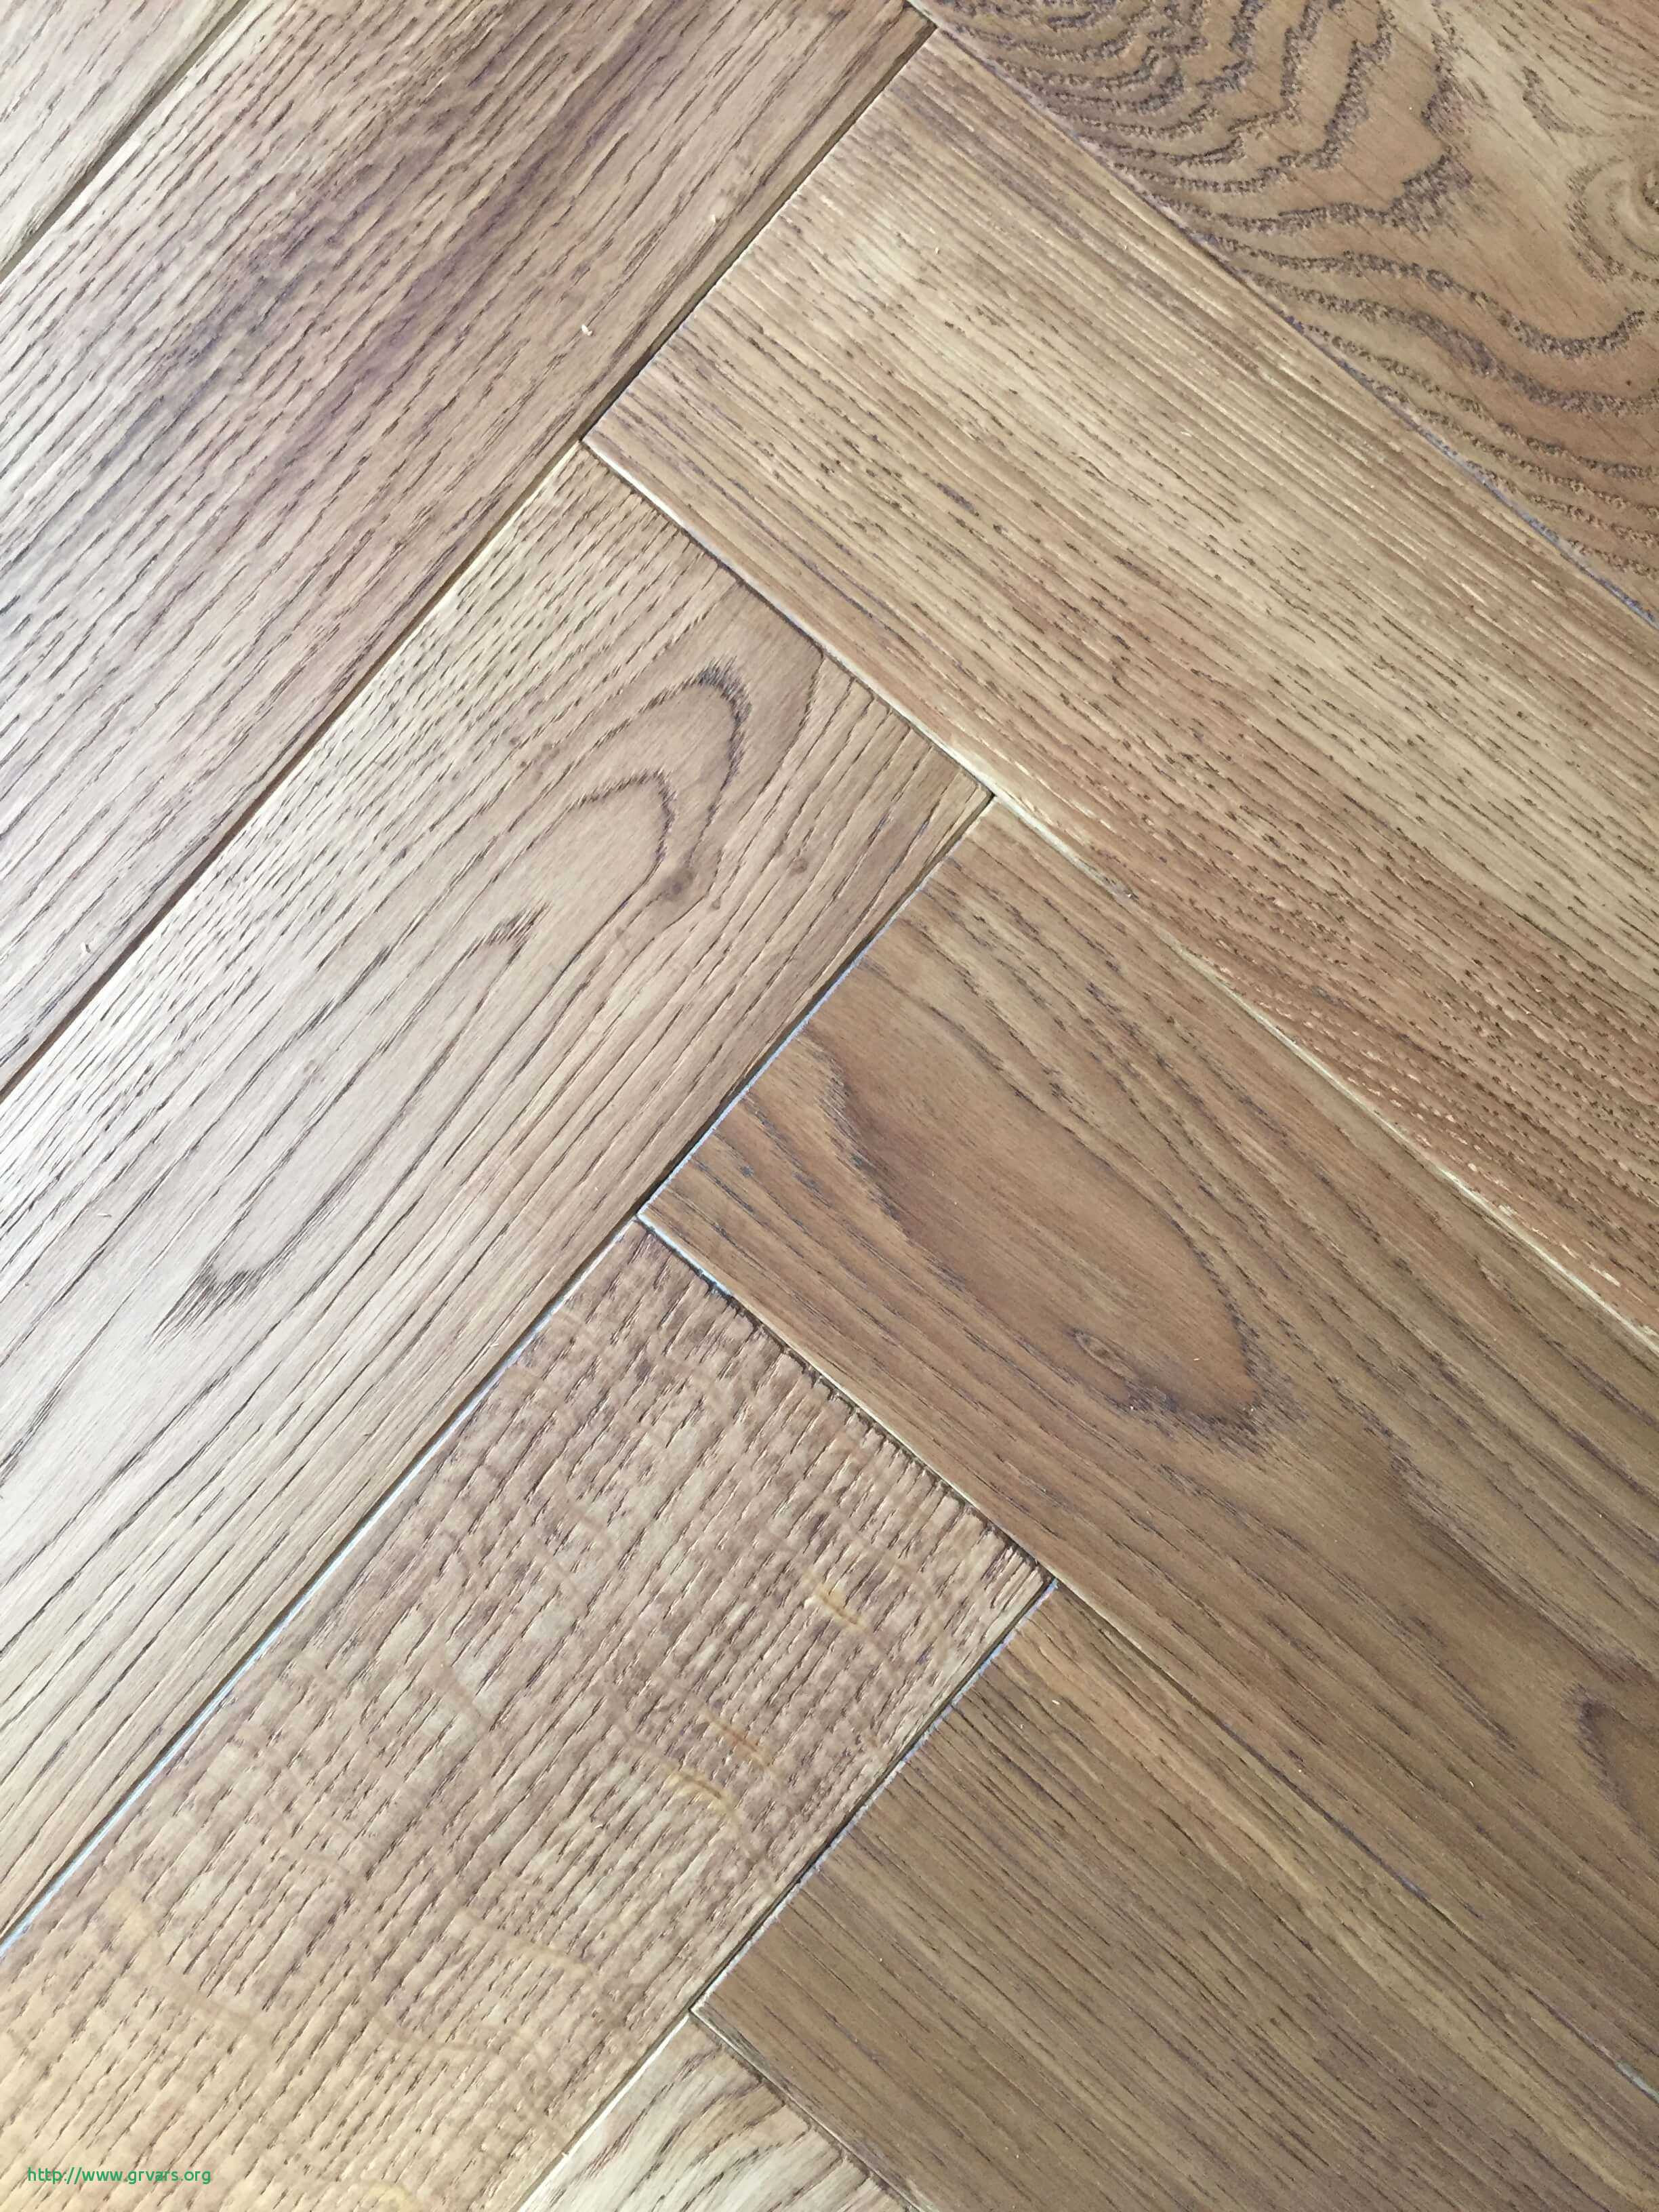 23 Awesome Price to Install Hardwood Floors Home Depot 2024 free download price to install hardwood floors home depot of 20 meilleur de how much to charge to install hardwood floor ideas blog throughout how much to charge to install hardwood floor luxe installing 